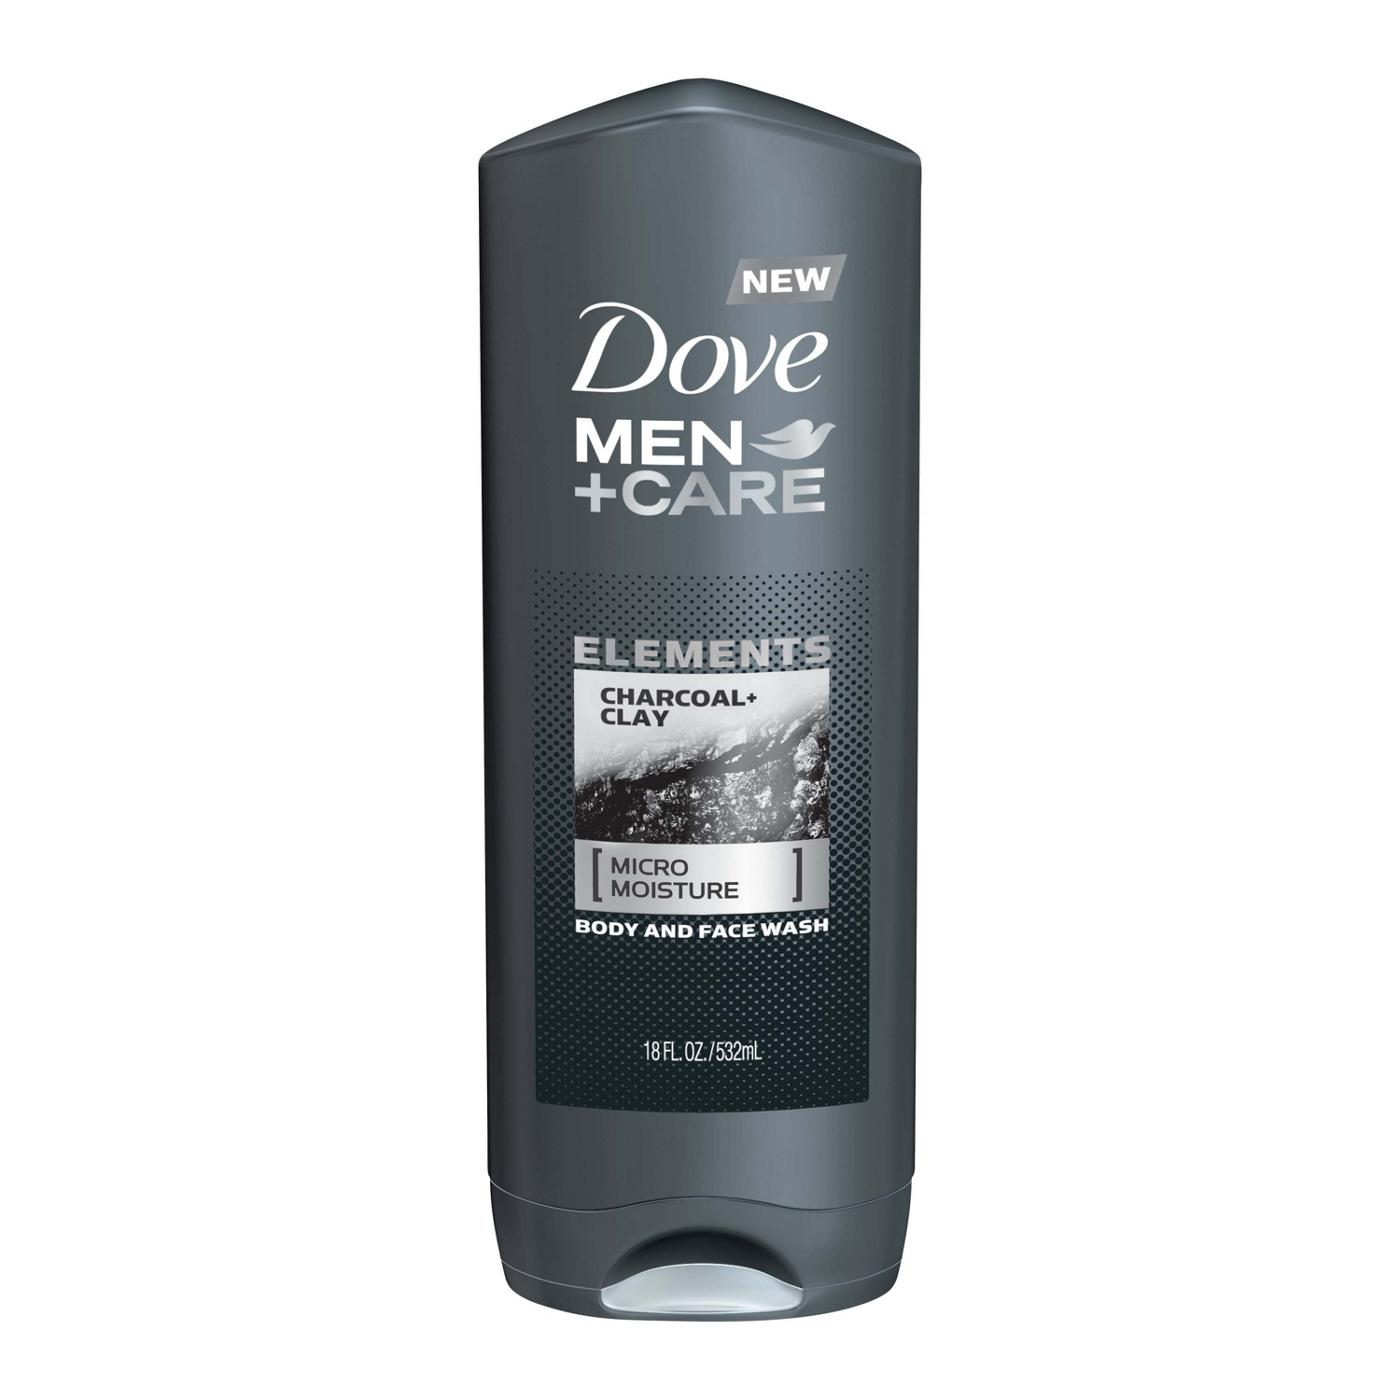 Dove Men+Care Elements Body + Face Wash - Charcoal + Clay ; image 1 of 3